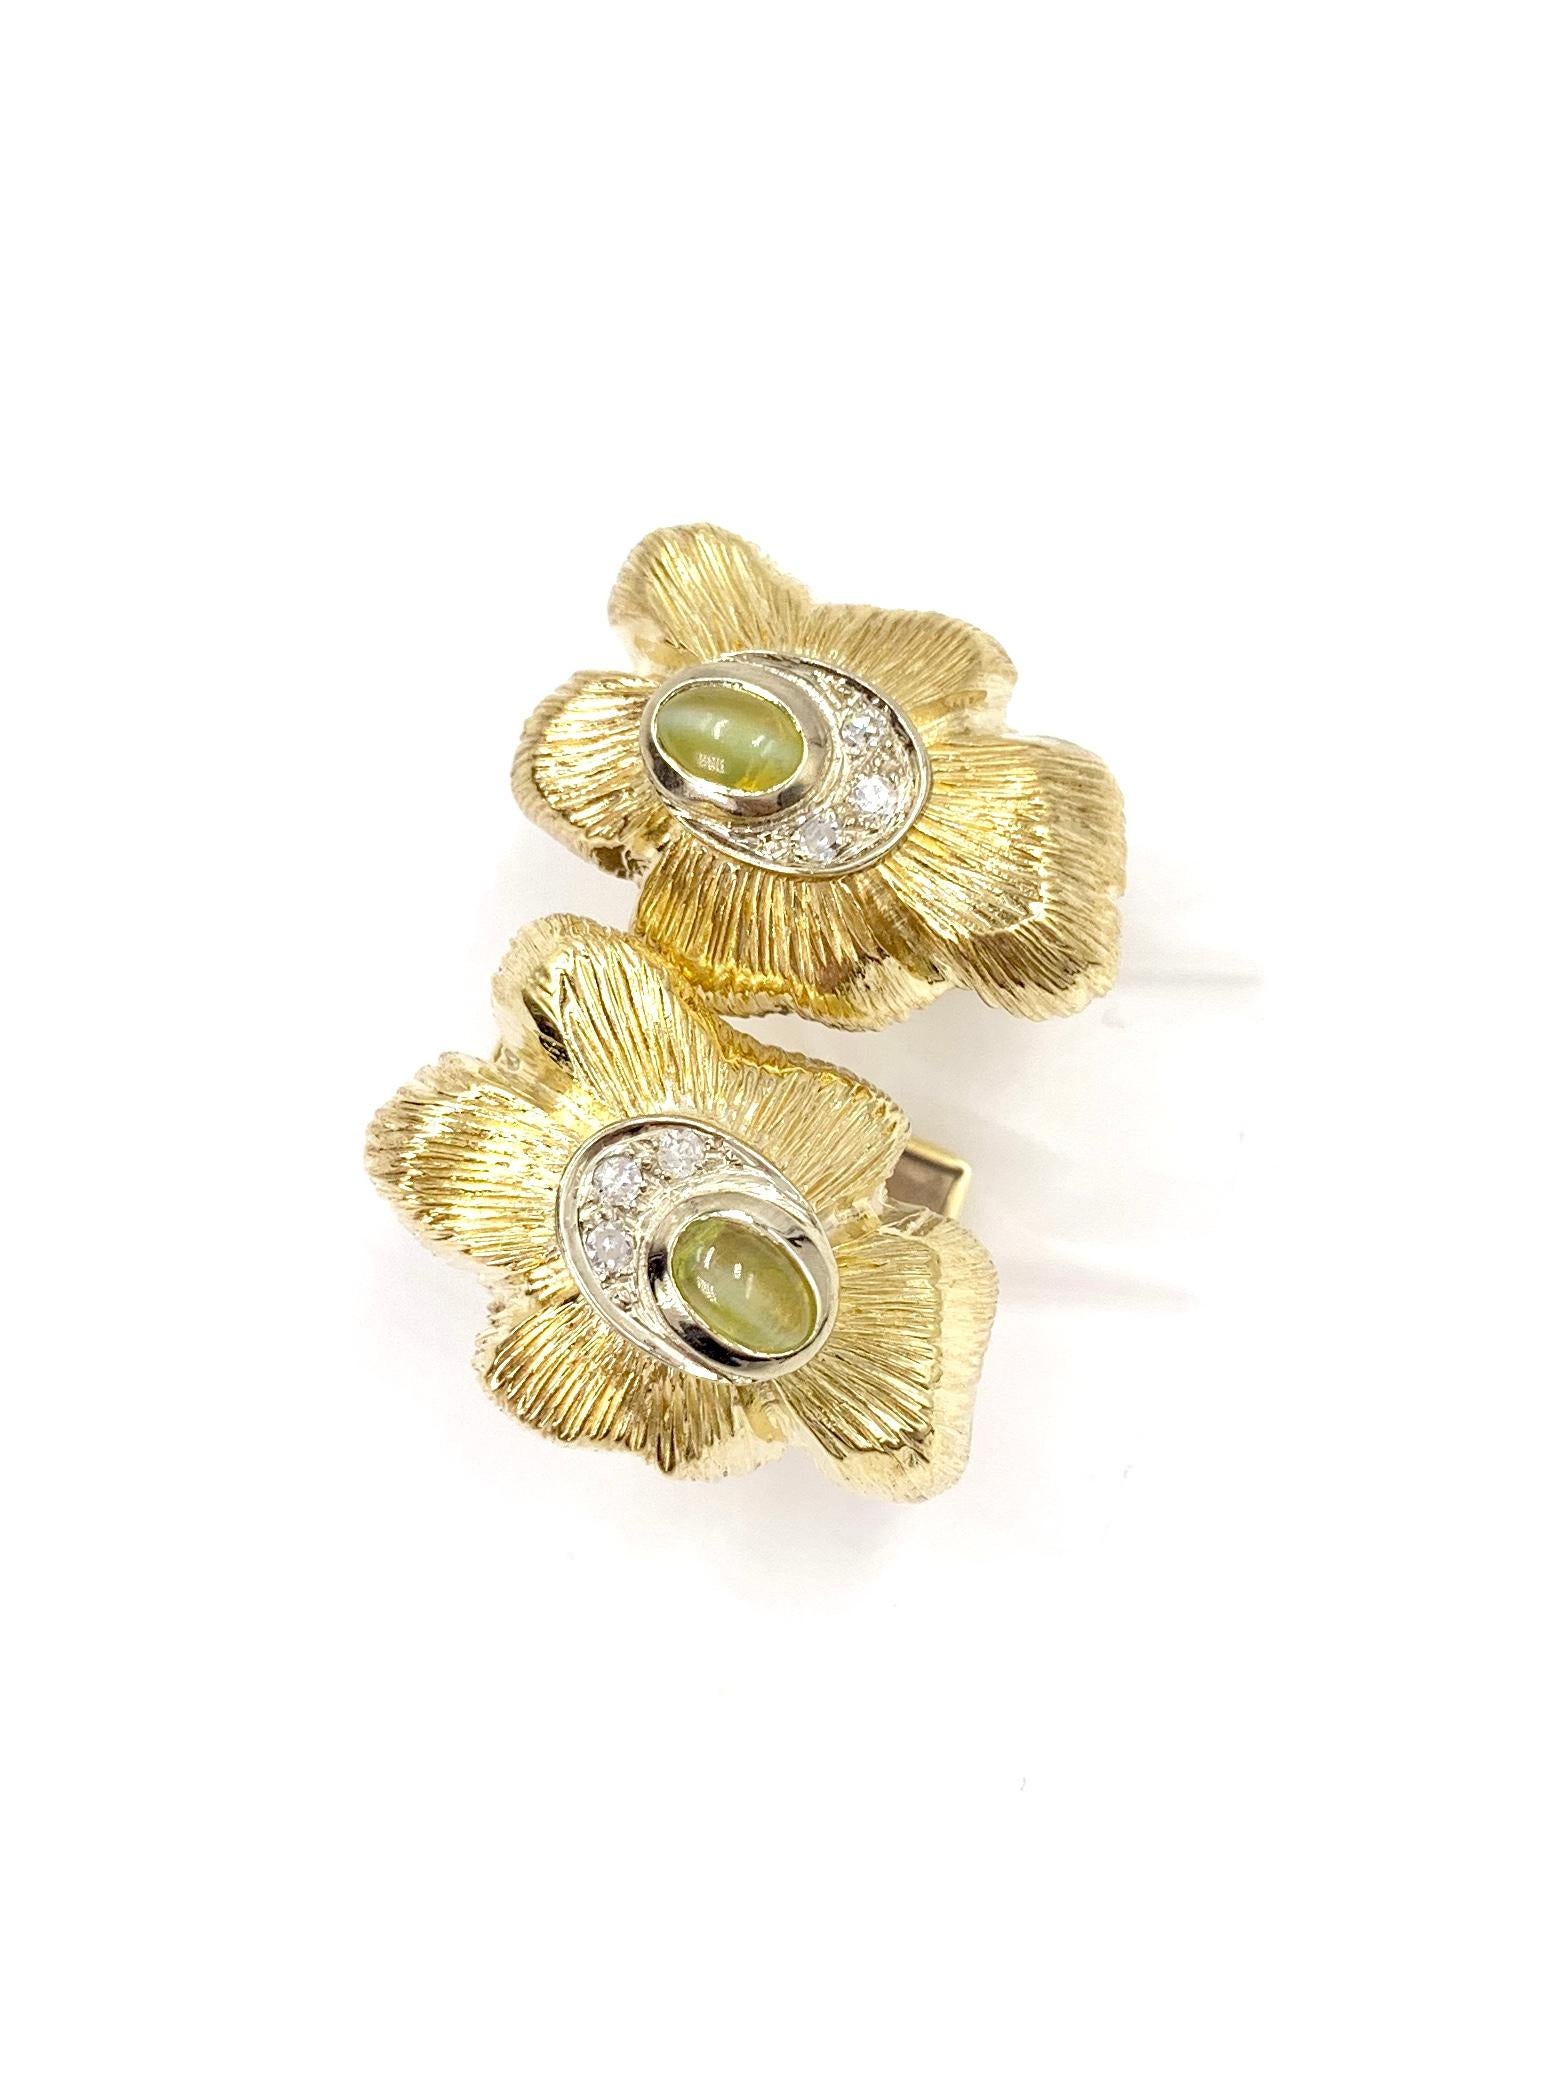 A very unique and well made set of 14 karat yellow vintage gold cuff links featuring single cut diamonds and oval cat's eye chrysoberyl in a light green tone with a golden/honey undertone. Chrysoberyl has a distinct cat's eye luster when light is